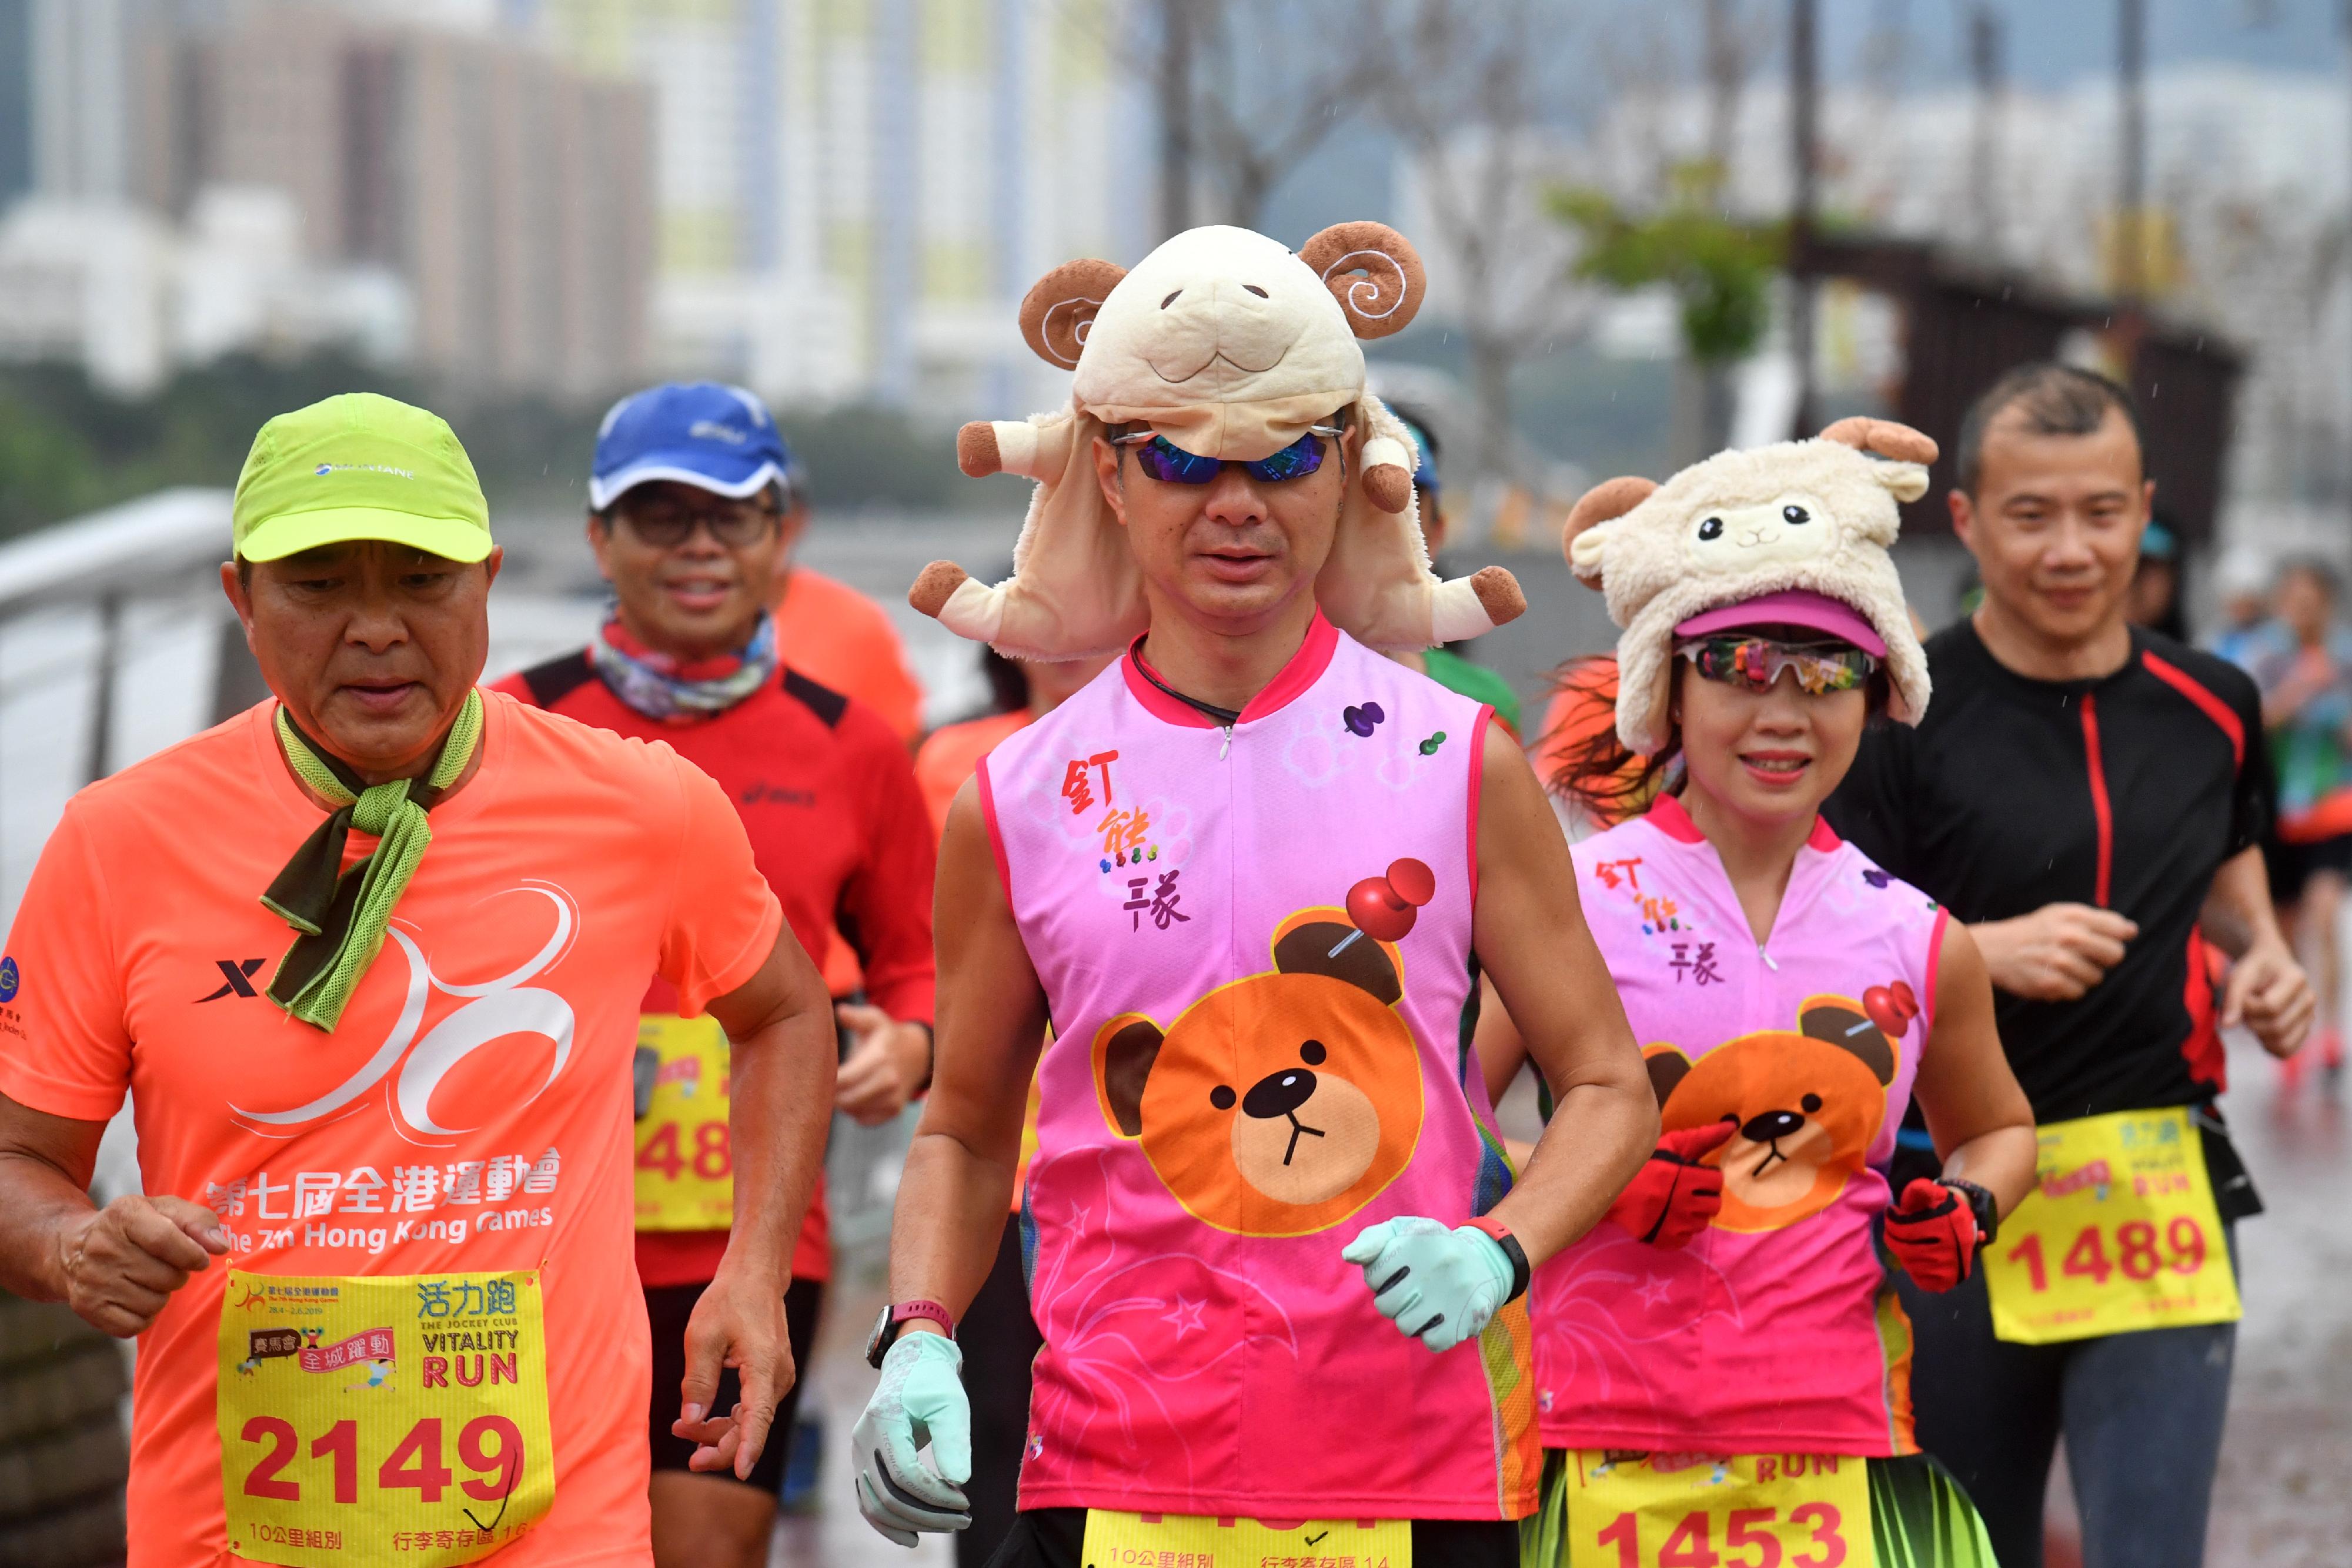 The 7th Hong Kong Games' Jockey Club Vitality Run was held alongside the Shing Mun River in Sha Tin in 2019, attracting over 5 000 members of the public to join. Photo shows some runners participating in the 7th Hong Kong Games' Jockey Club Vitality Run dressing up to compete for the individual Most Creative Costume Prize and the Overall Best Team Costume Prize.